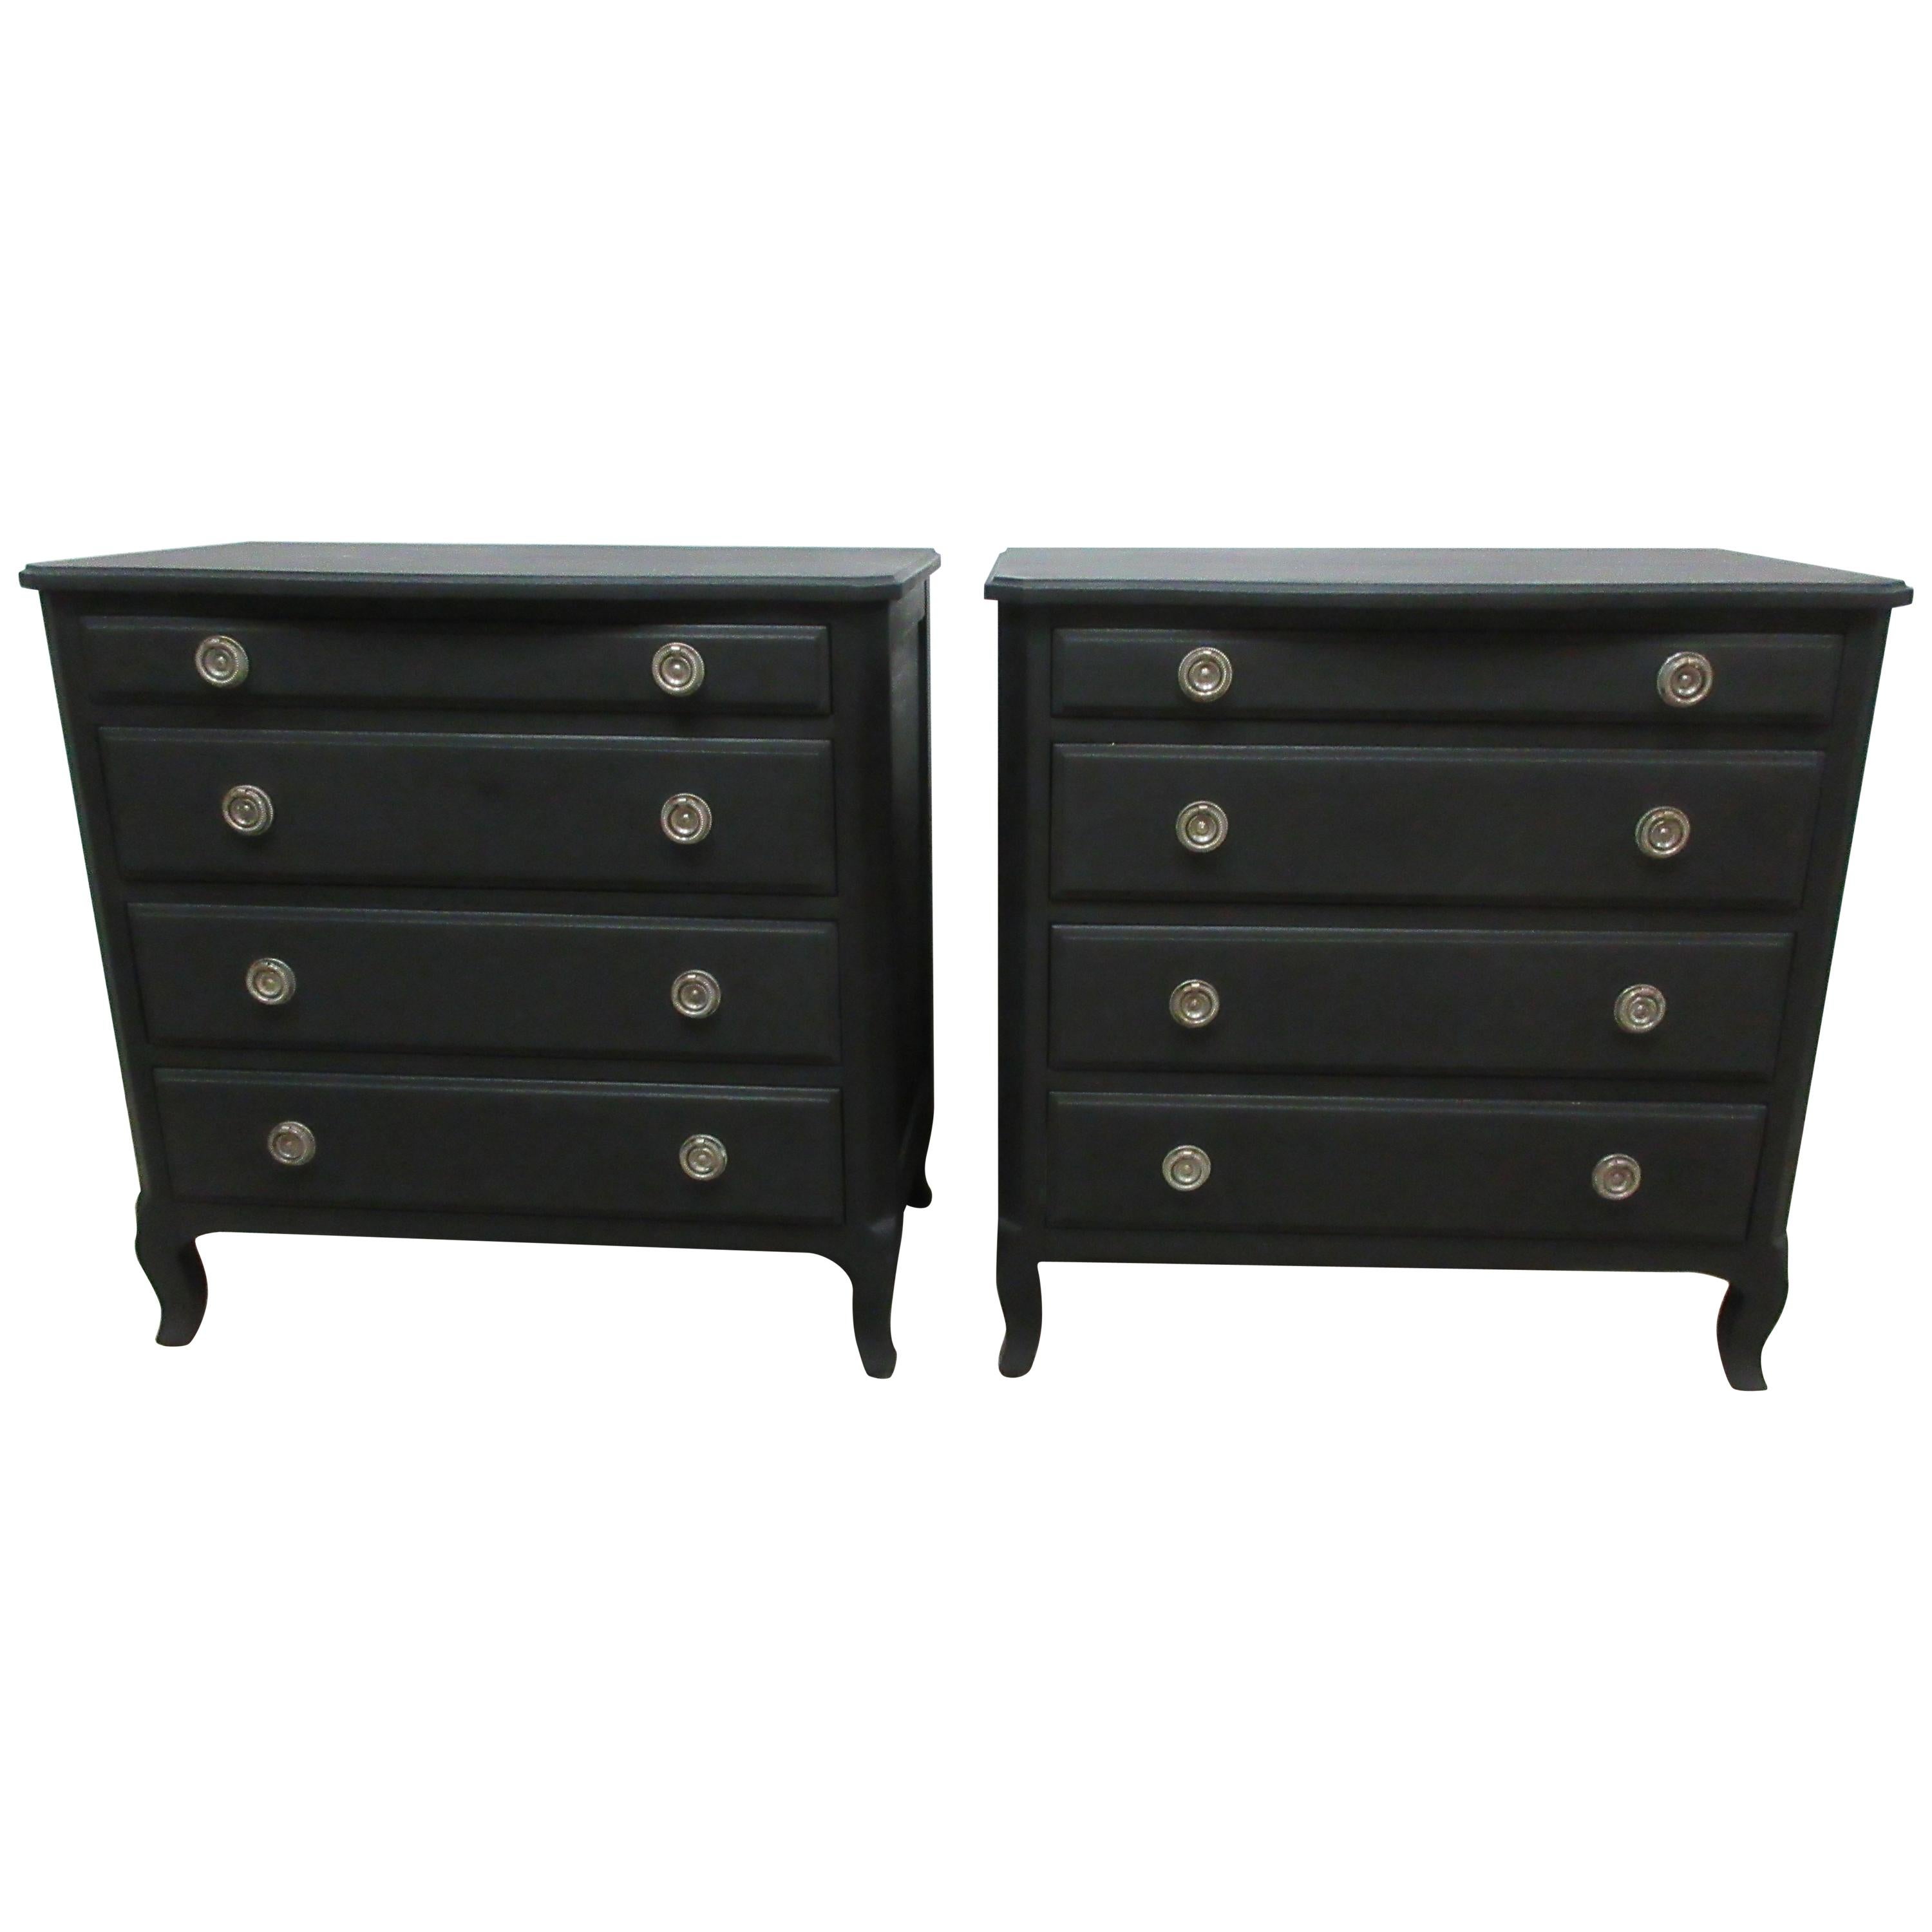 Matching Midnight Black Chest of Drawers For Sale